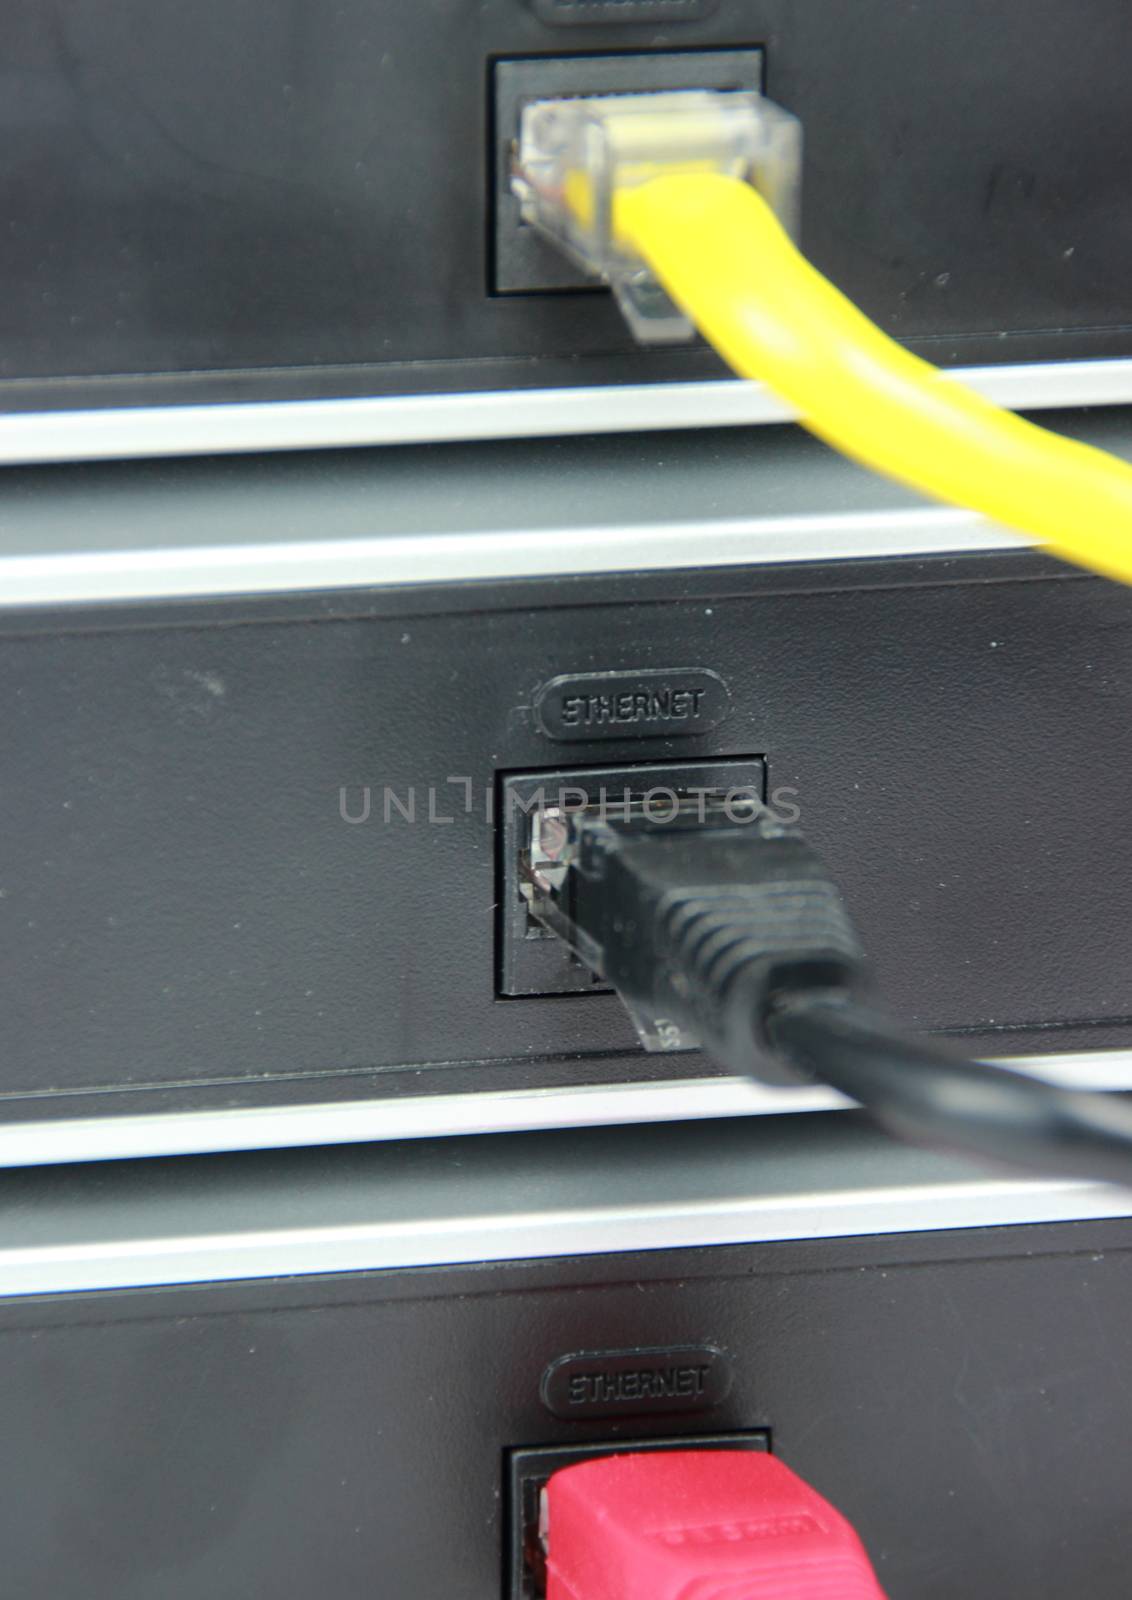 Cables connected to internet port on router by HoleInTheBox